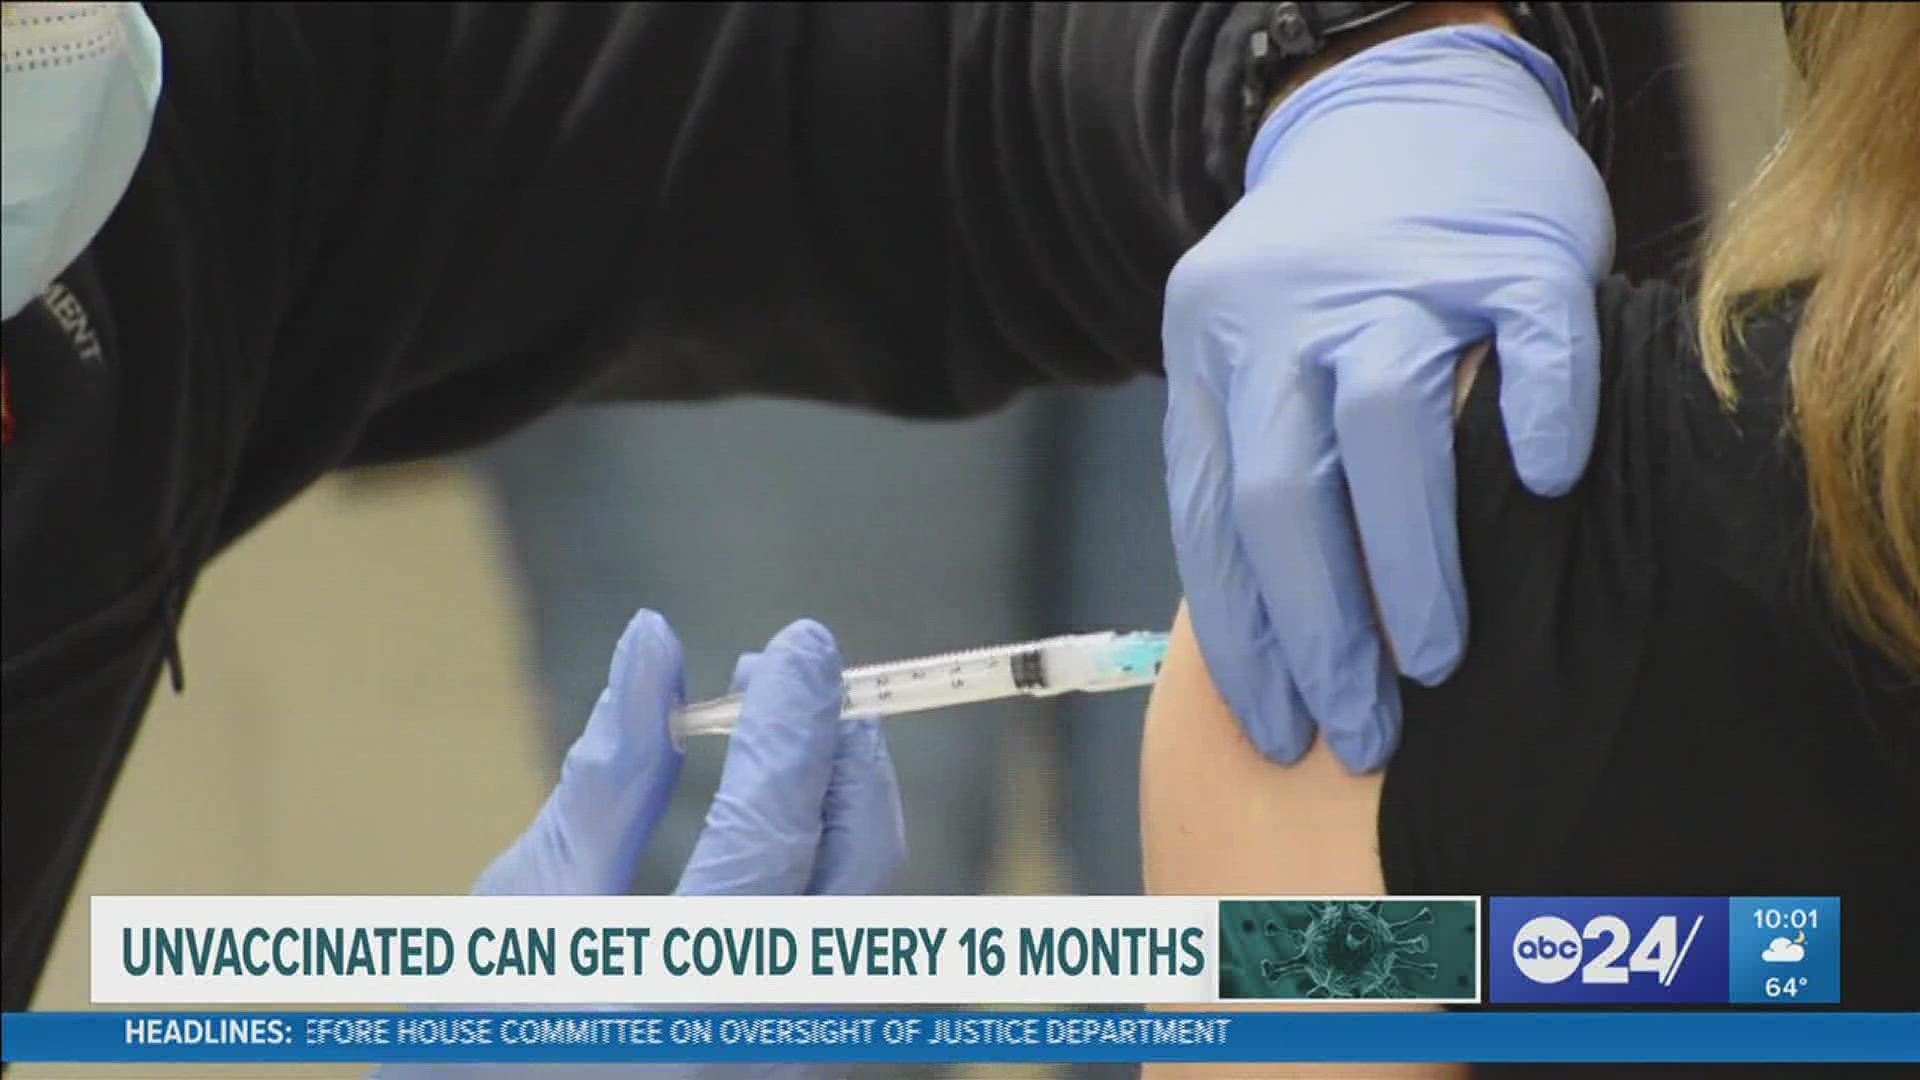 A Yale University study shows unvaccinated people can expect to be susceptible to Covid-19 every 16 months.